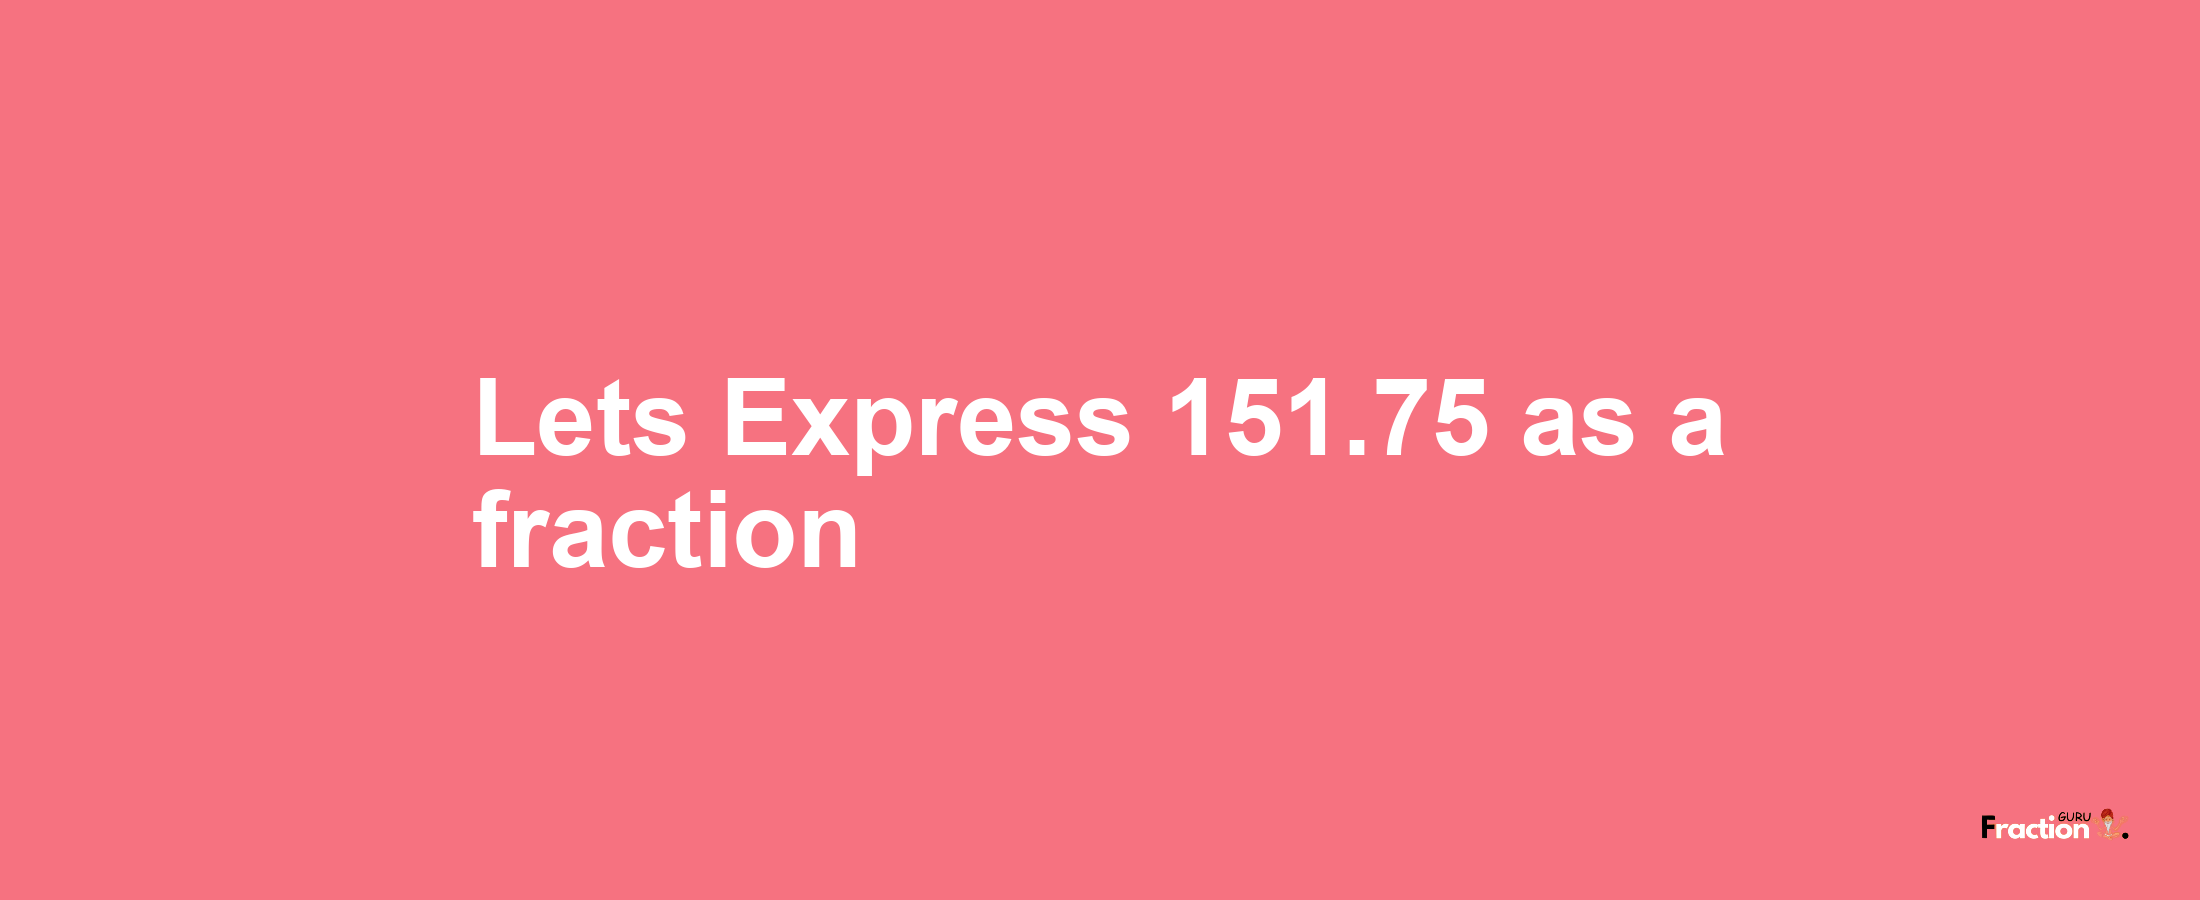 Lets Express 151.75 as afraction